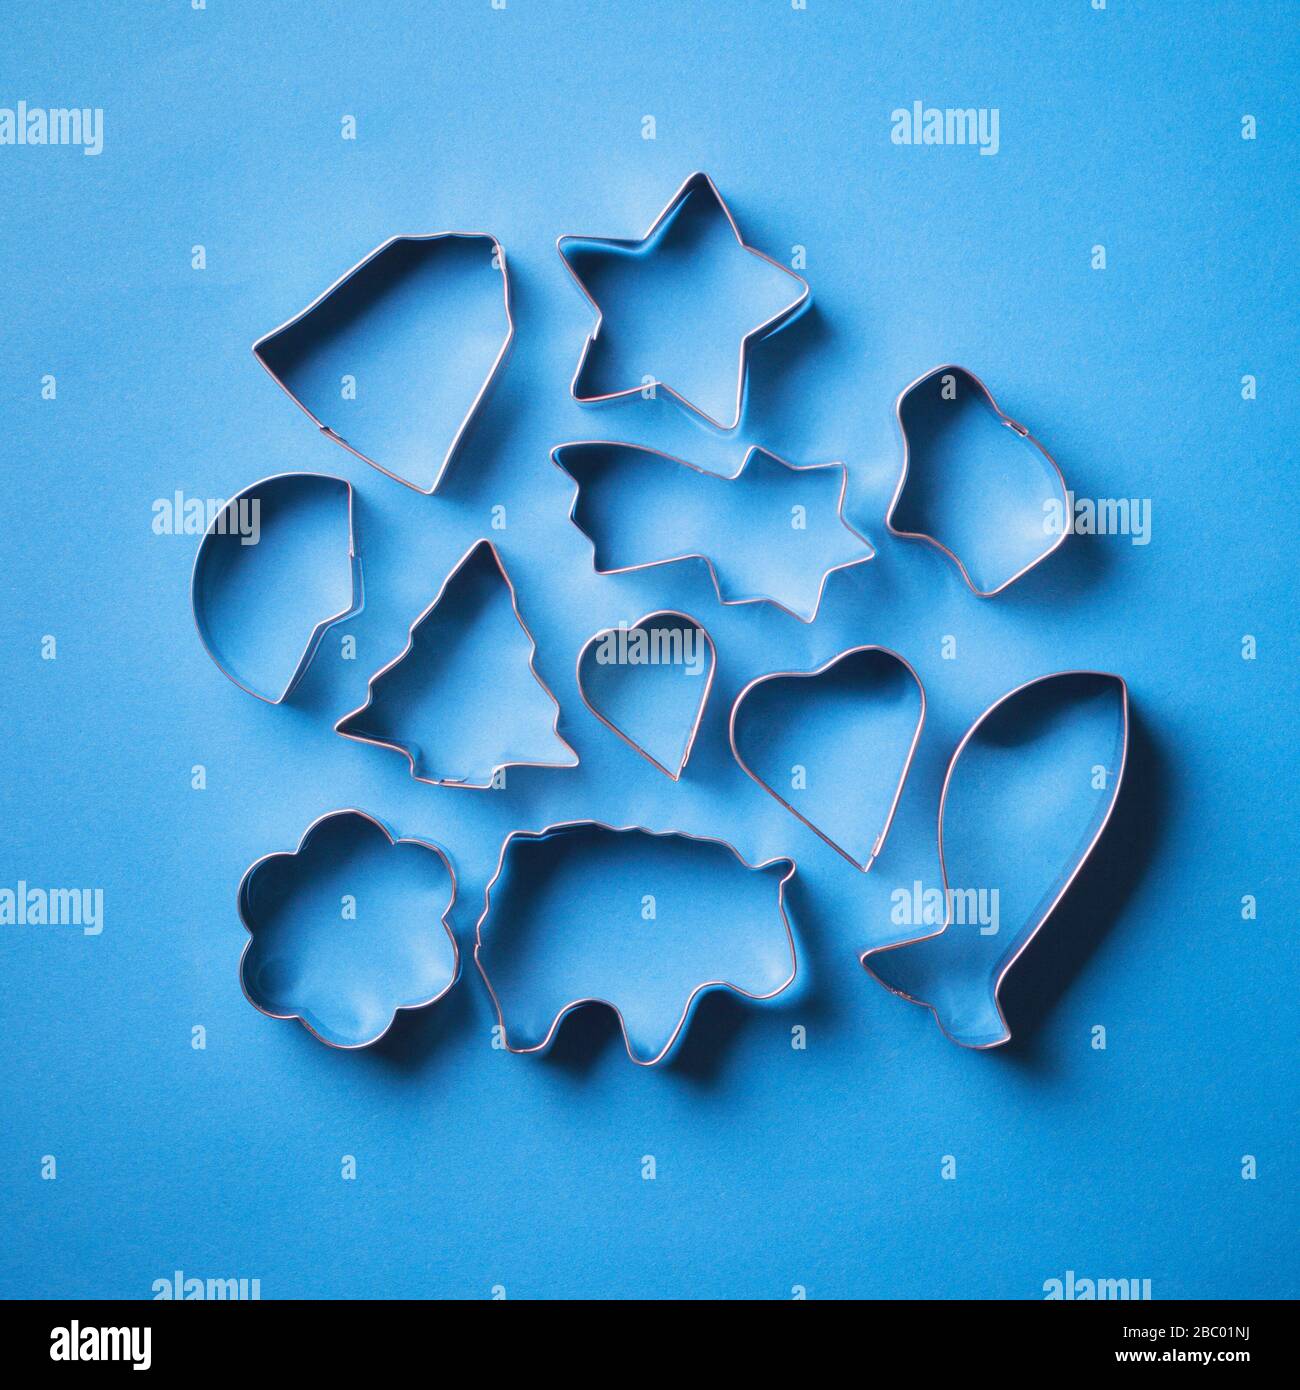 Metal molds for cookies on a blue background. Festive shaped pastry molds for making decorated dessert. With bright contrasting backlight. Stock Photo